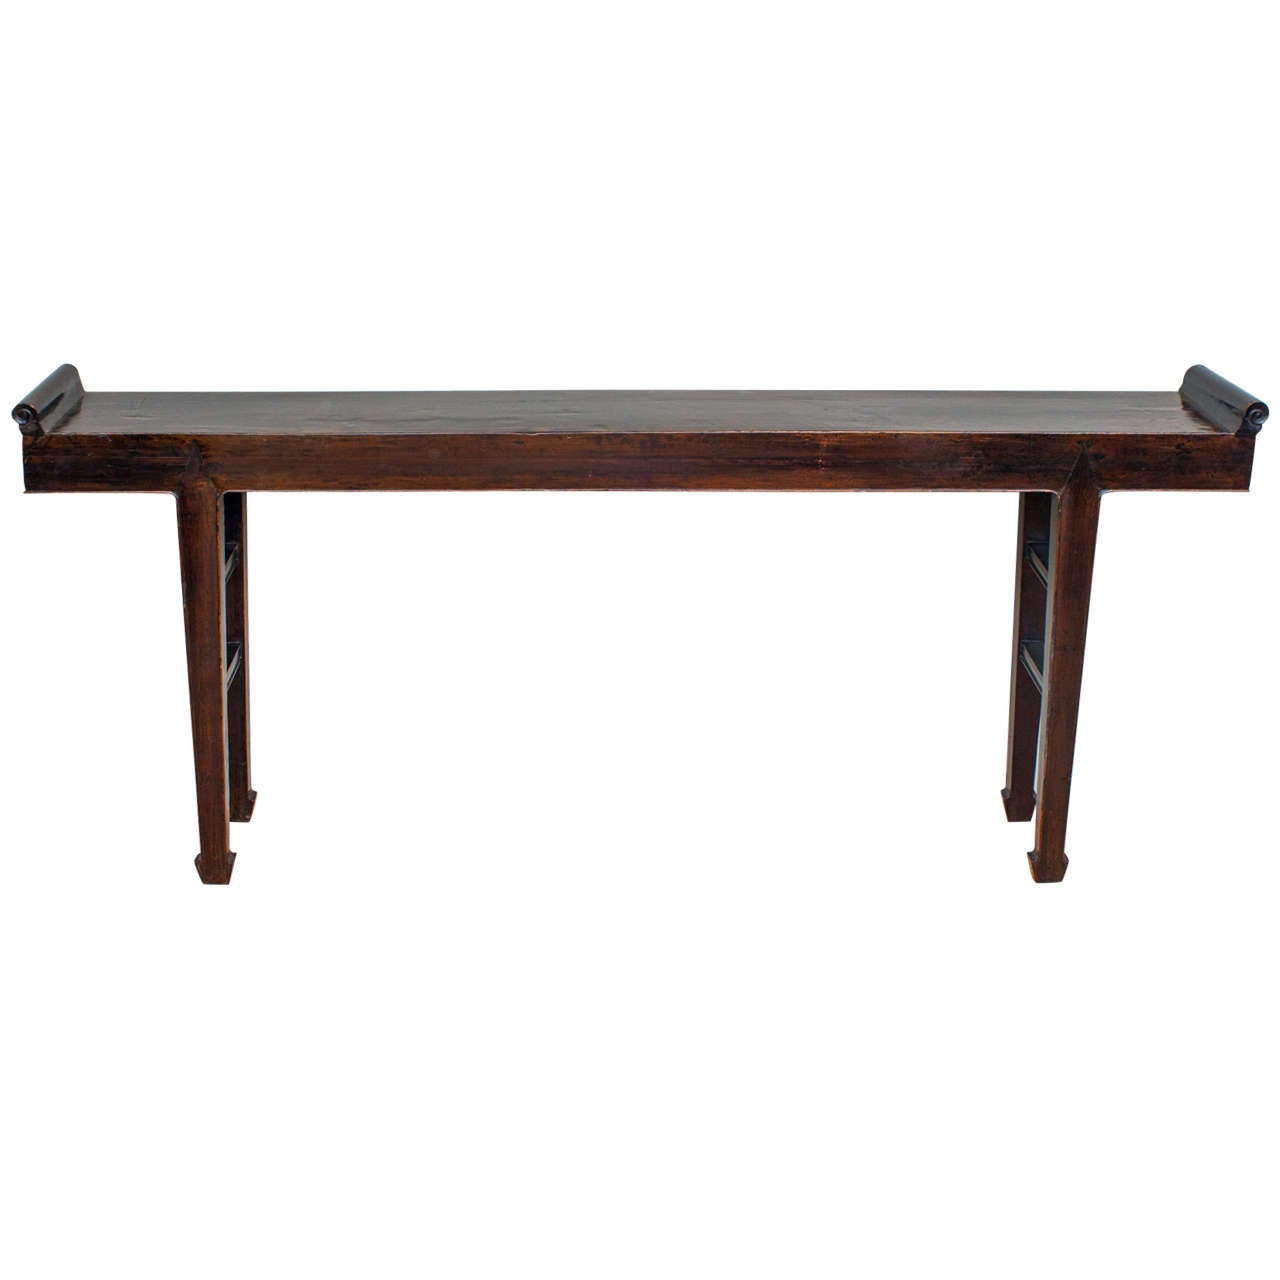 18th Century Long and Narrow Chinese Console Table